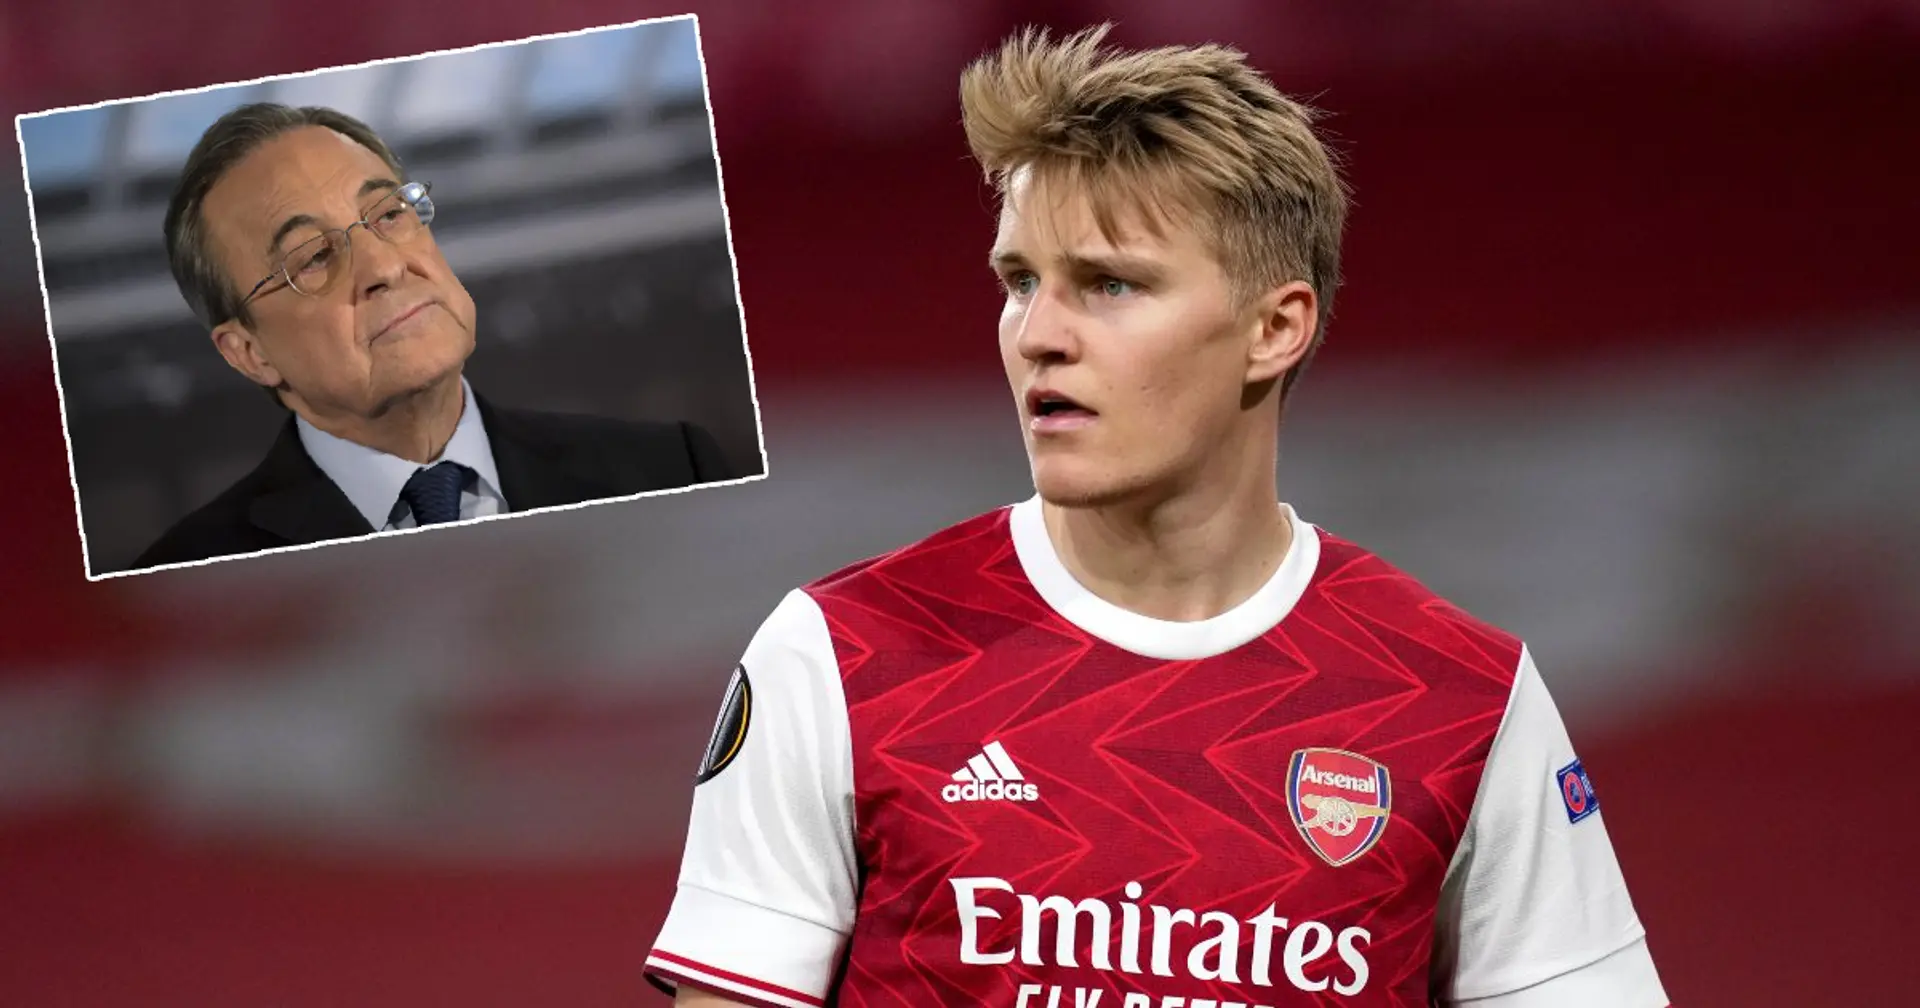 Real Madrid reportedly willing to sell Martin Odegaard for €60 million (reliability: 4 stars)